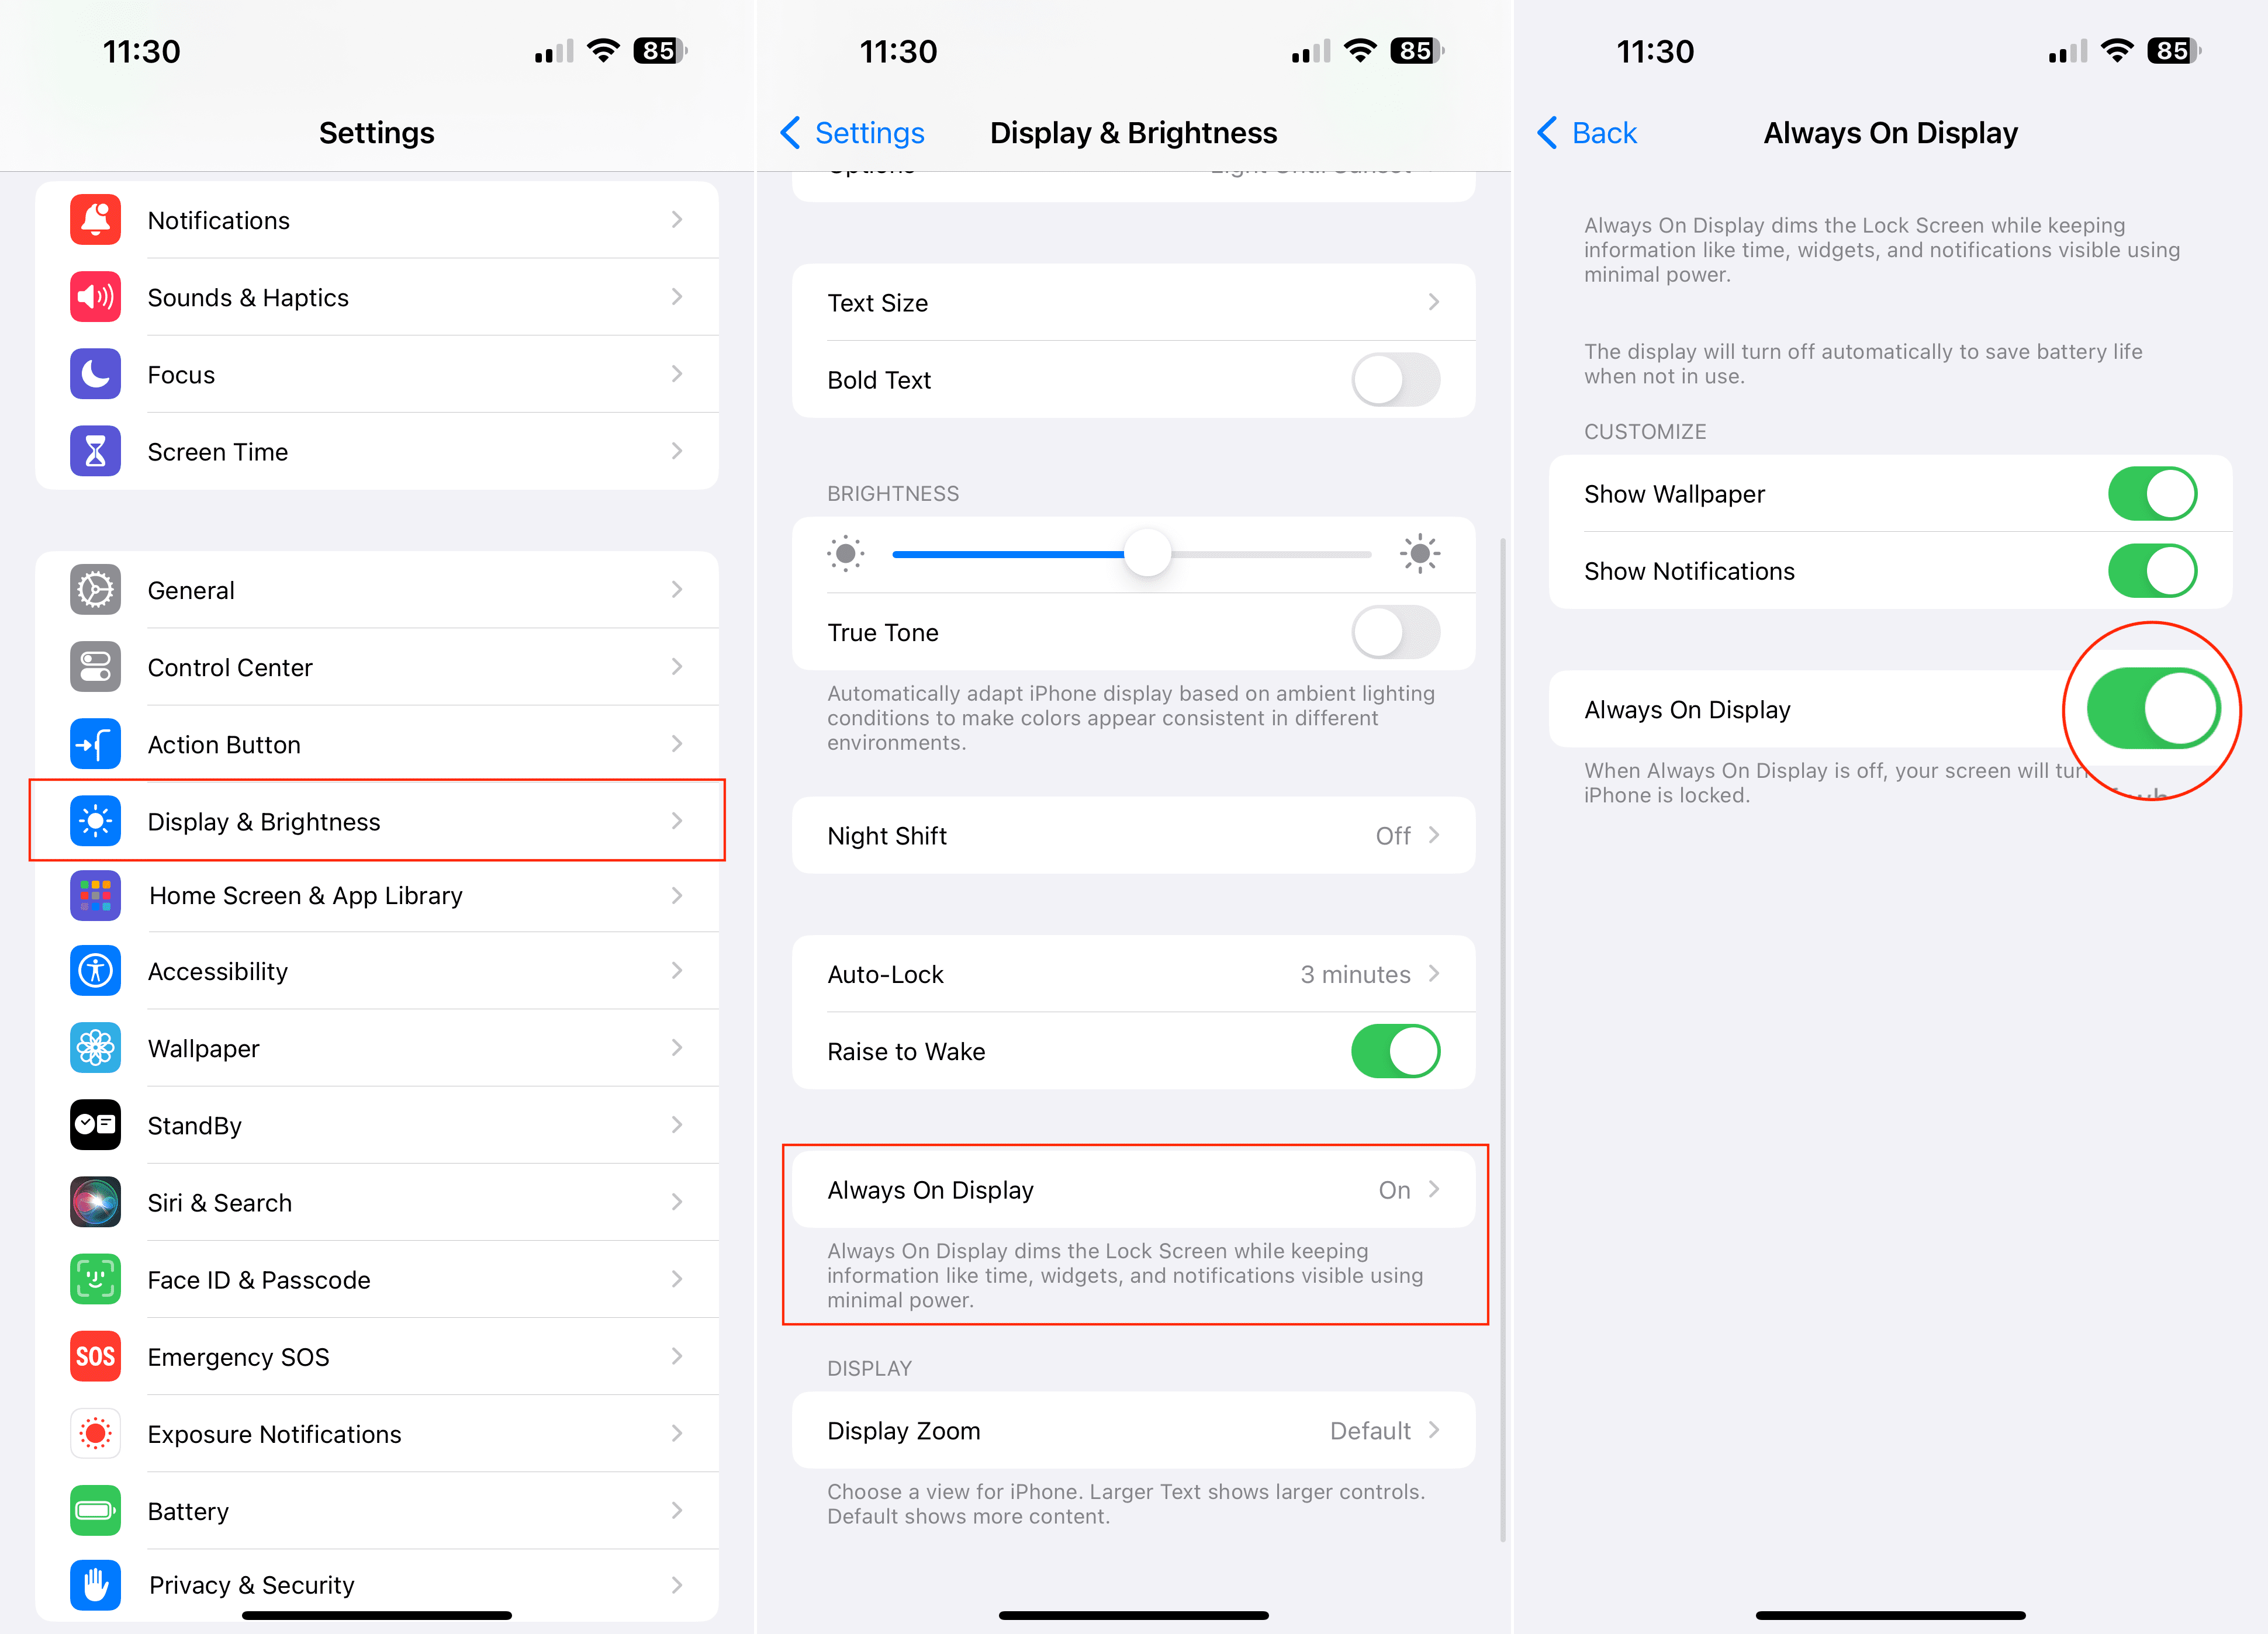 How to extend your iPhone battery life - Always On Display